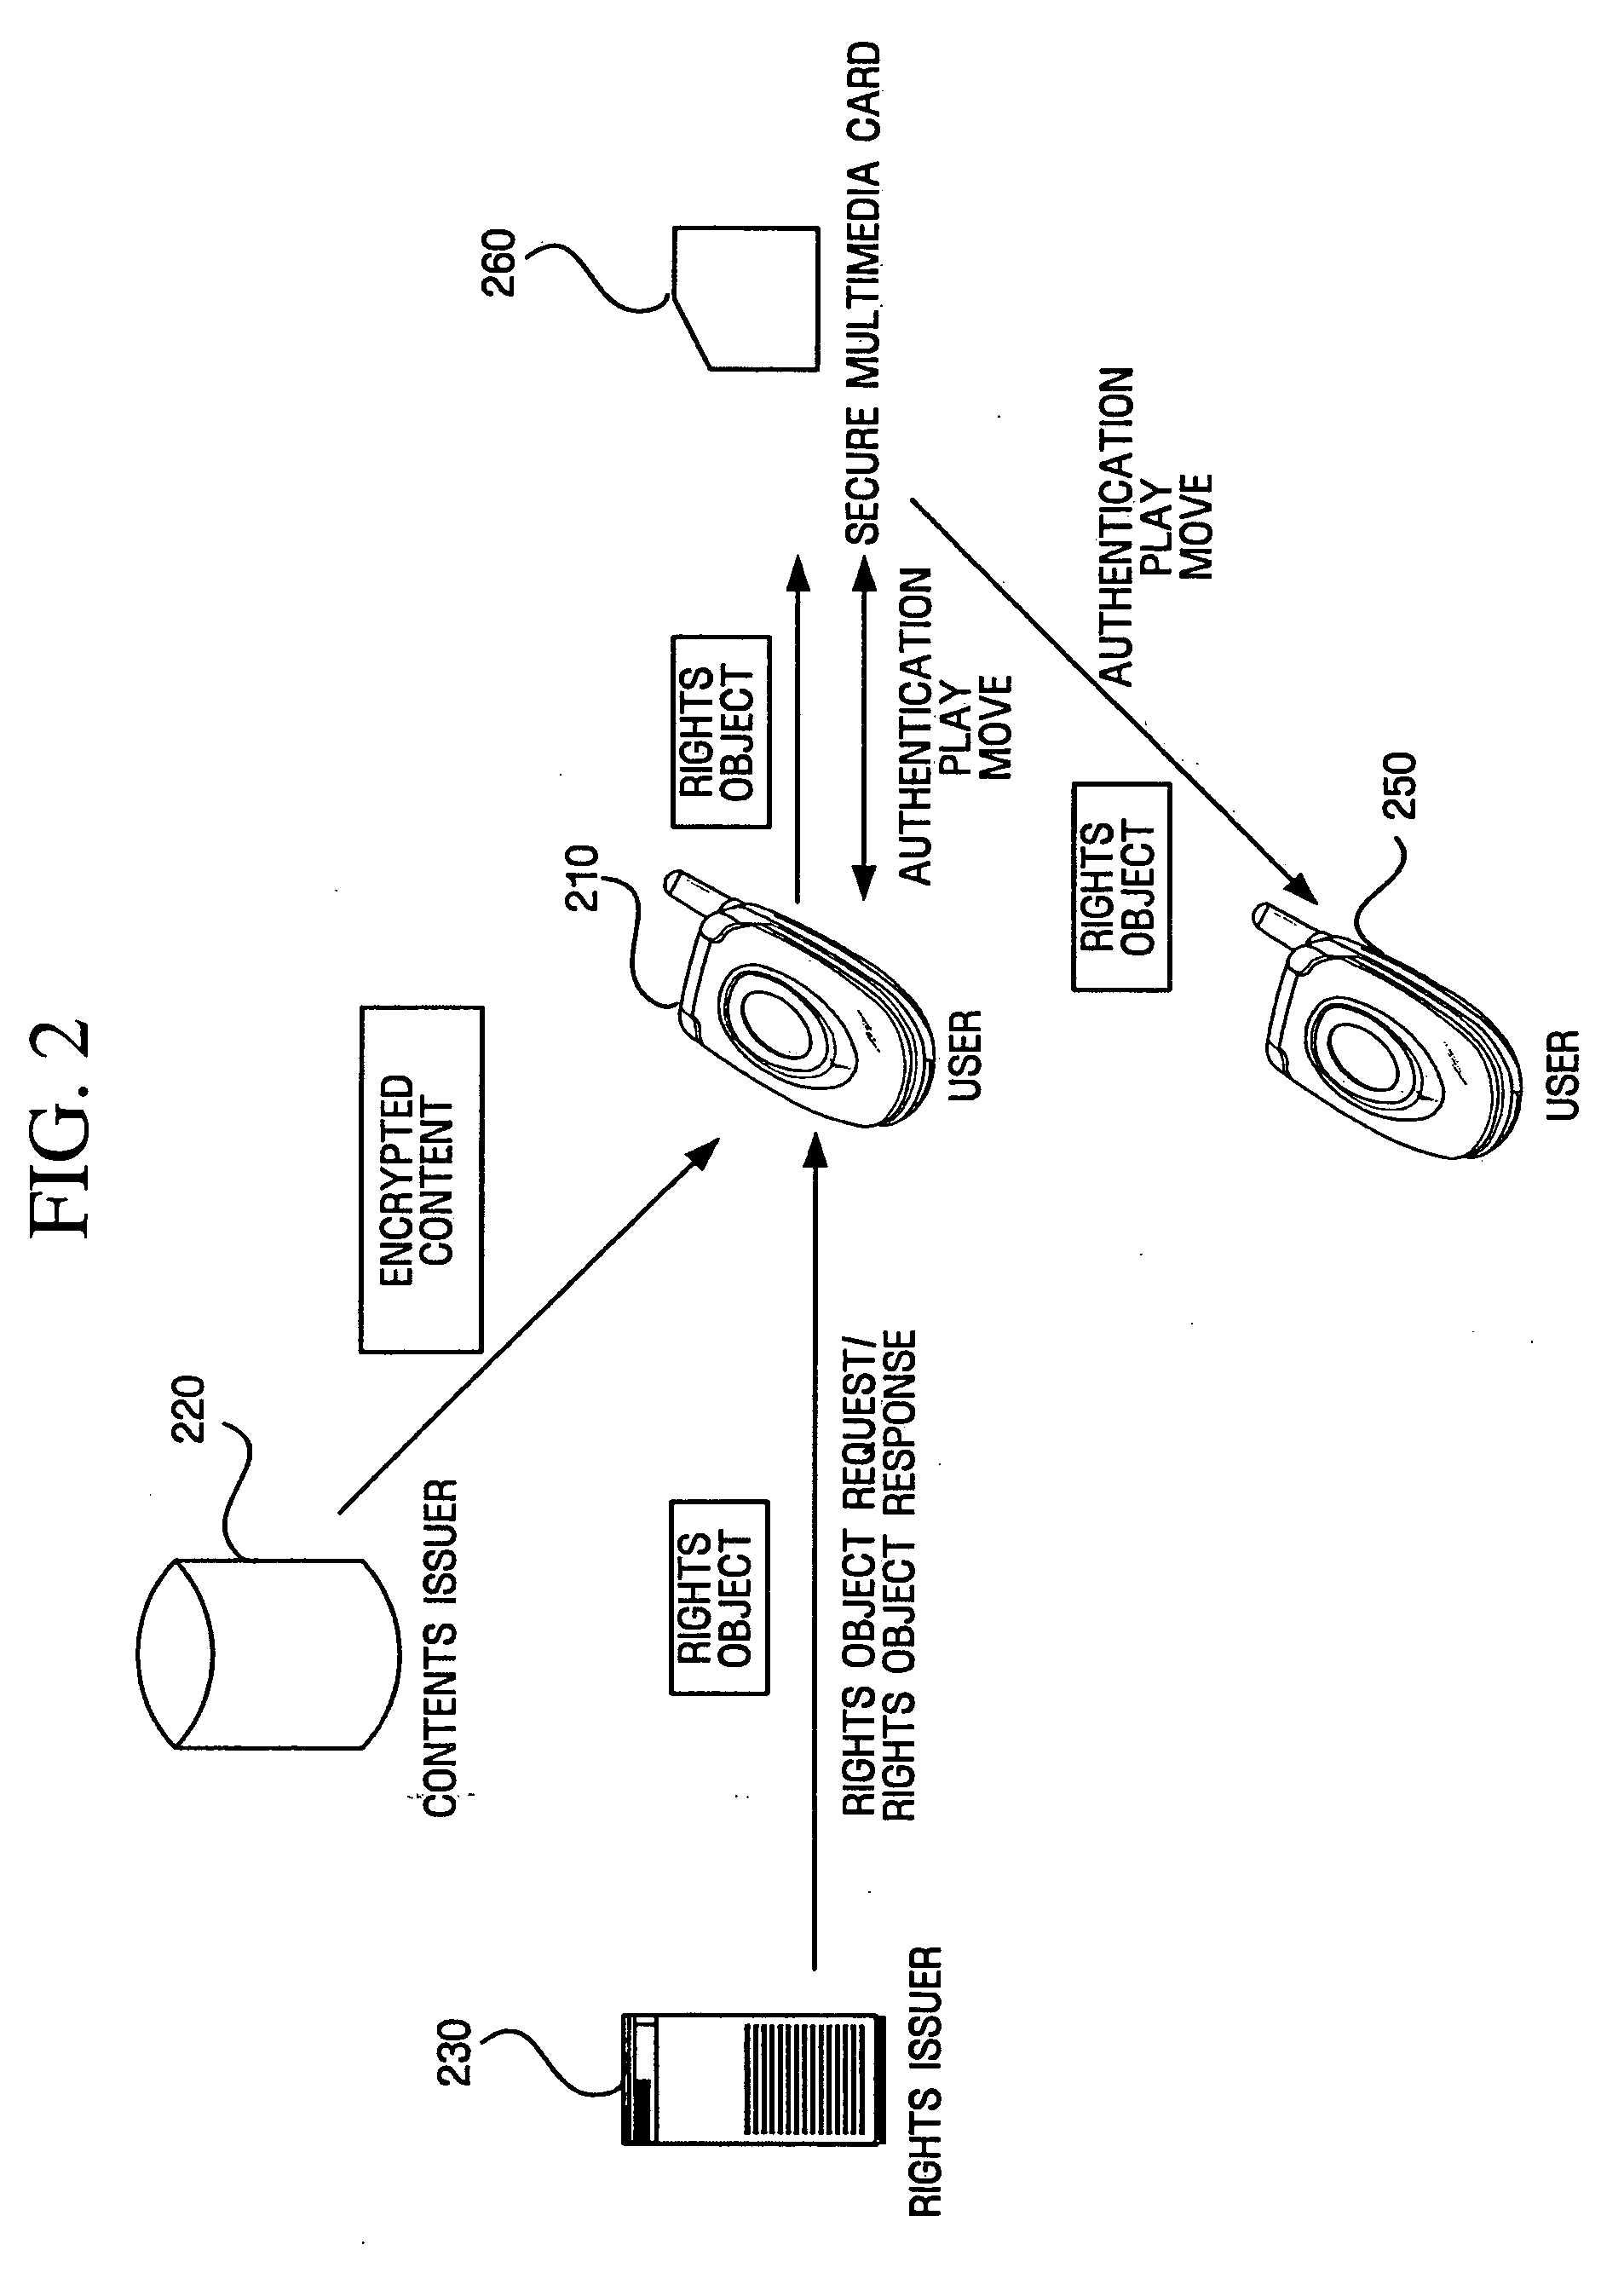 Authentication between device and portable storage